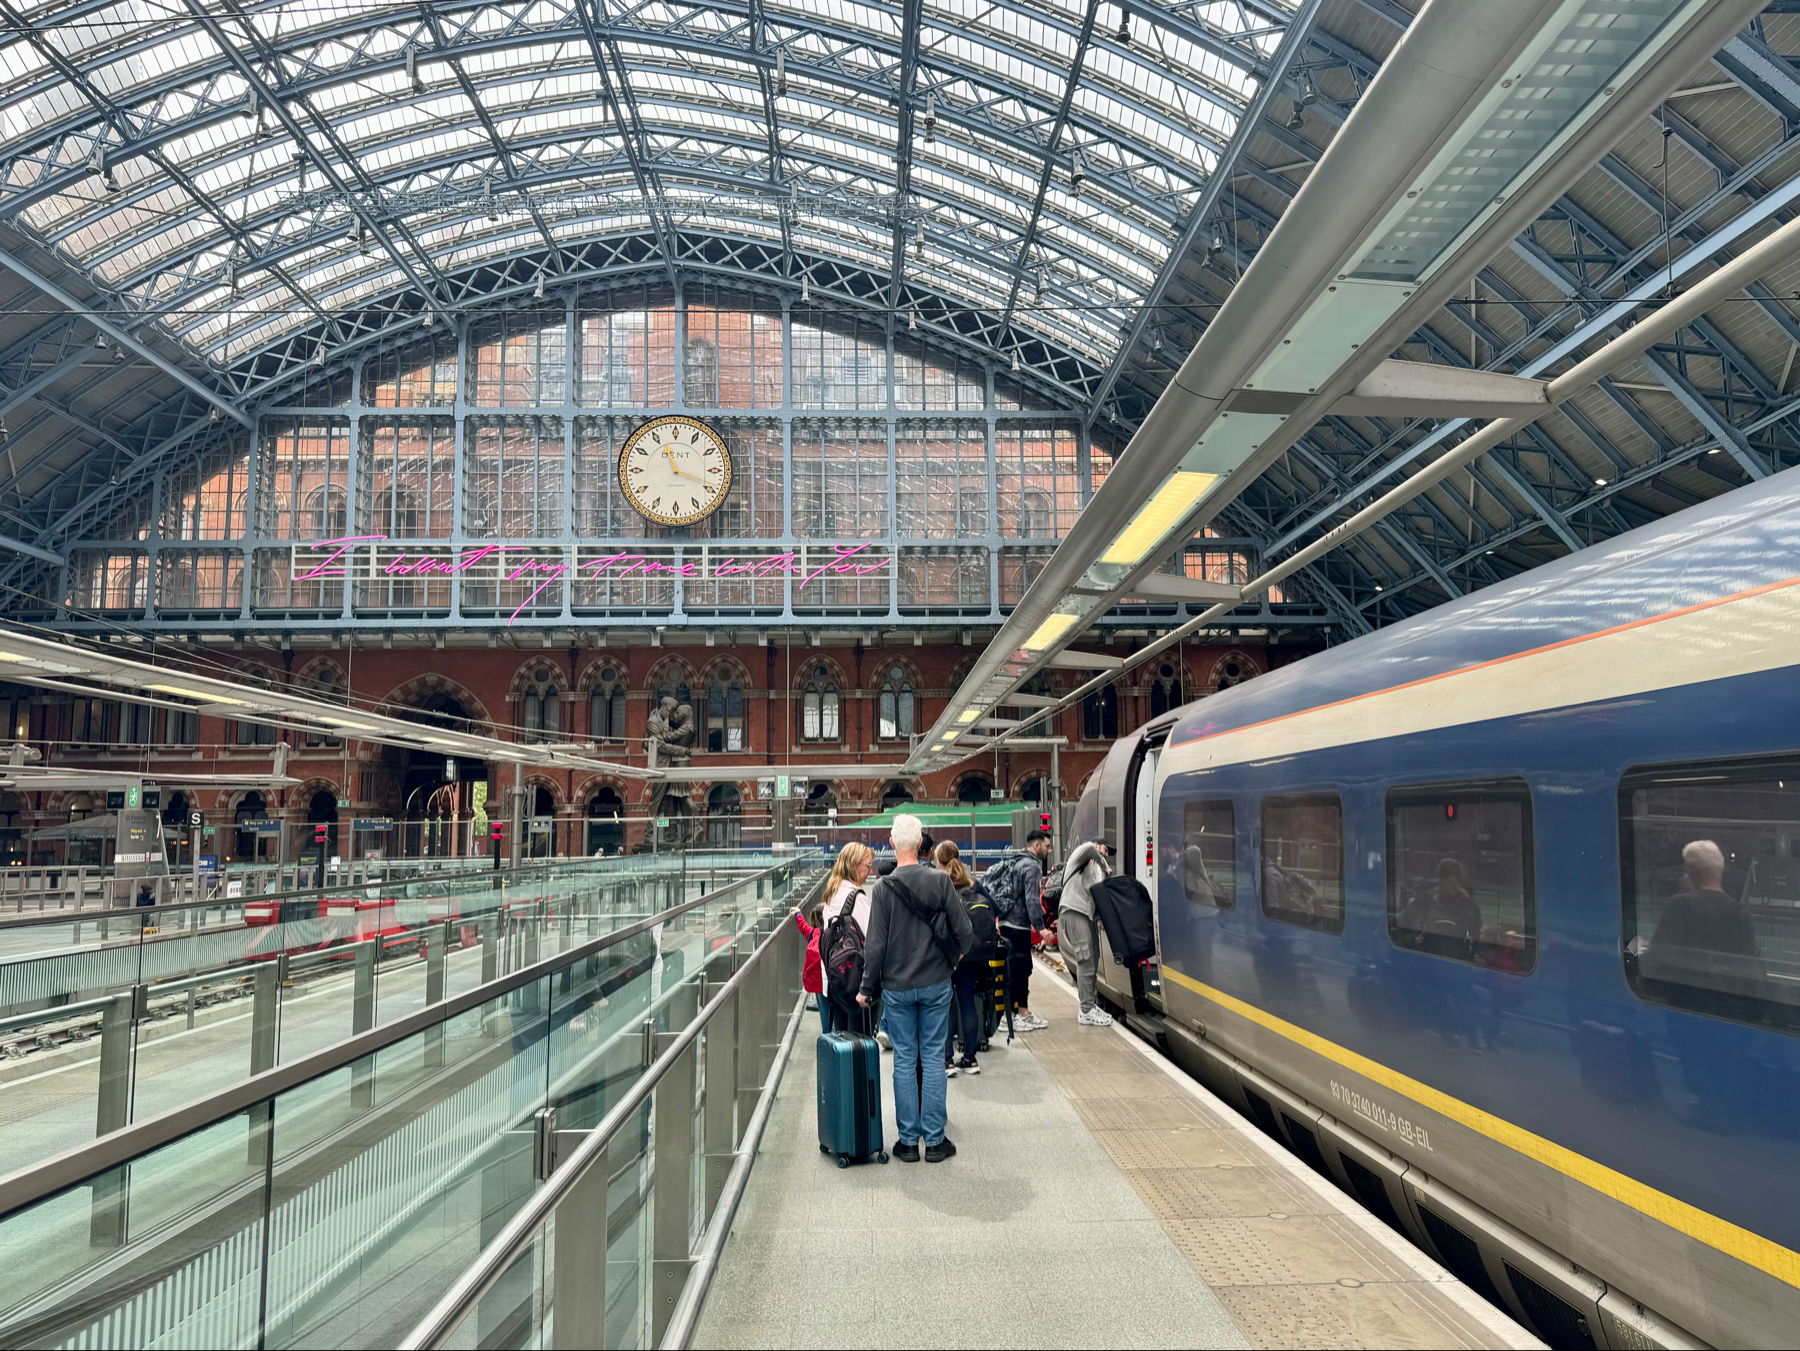 A busy train station with a large clock, passengers with luggage, a departing train, and a glass and metal roof structure.